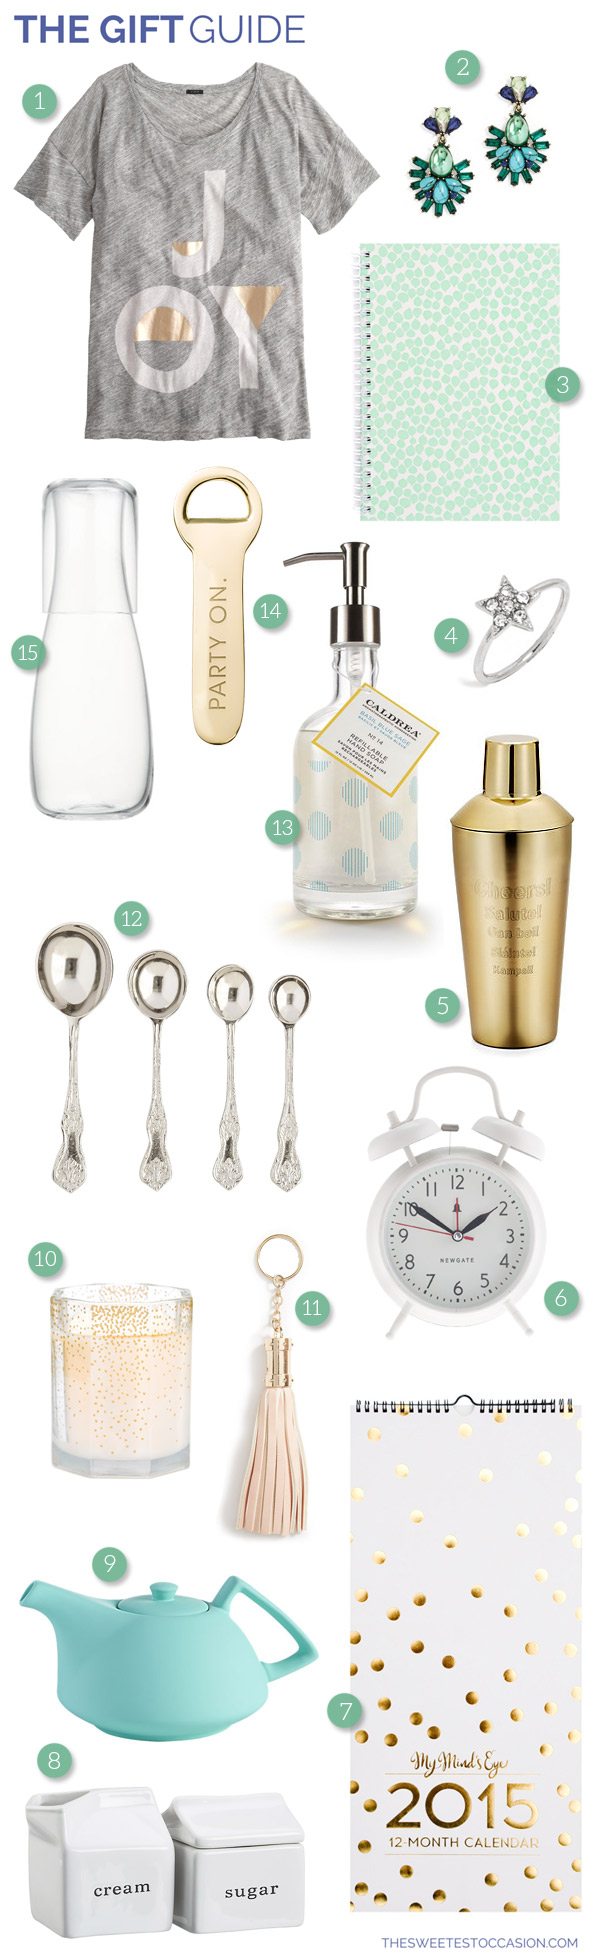 The Gift Guide: Hostess Gifts from @cydconverse